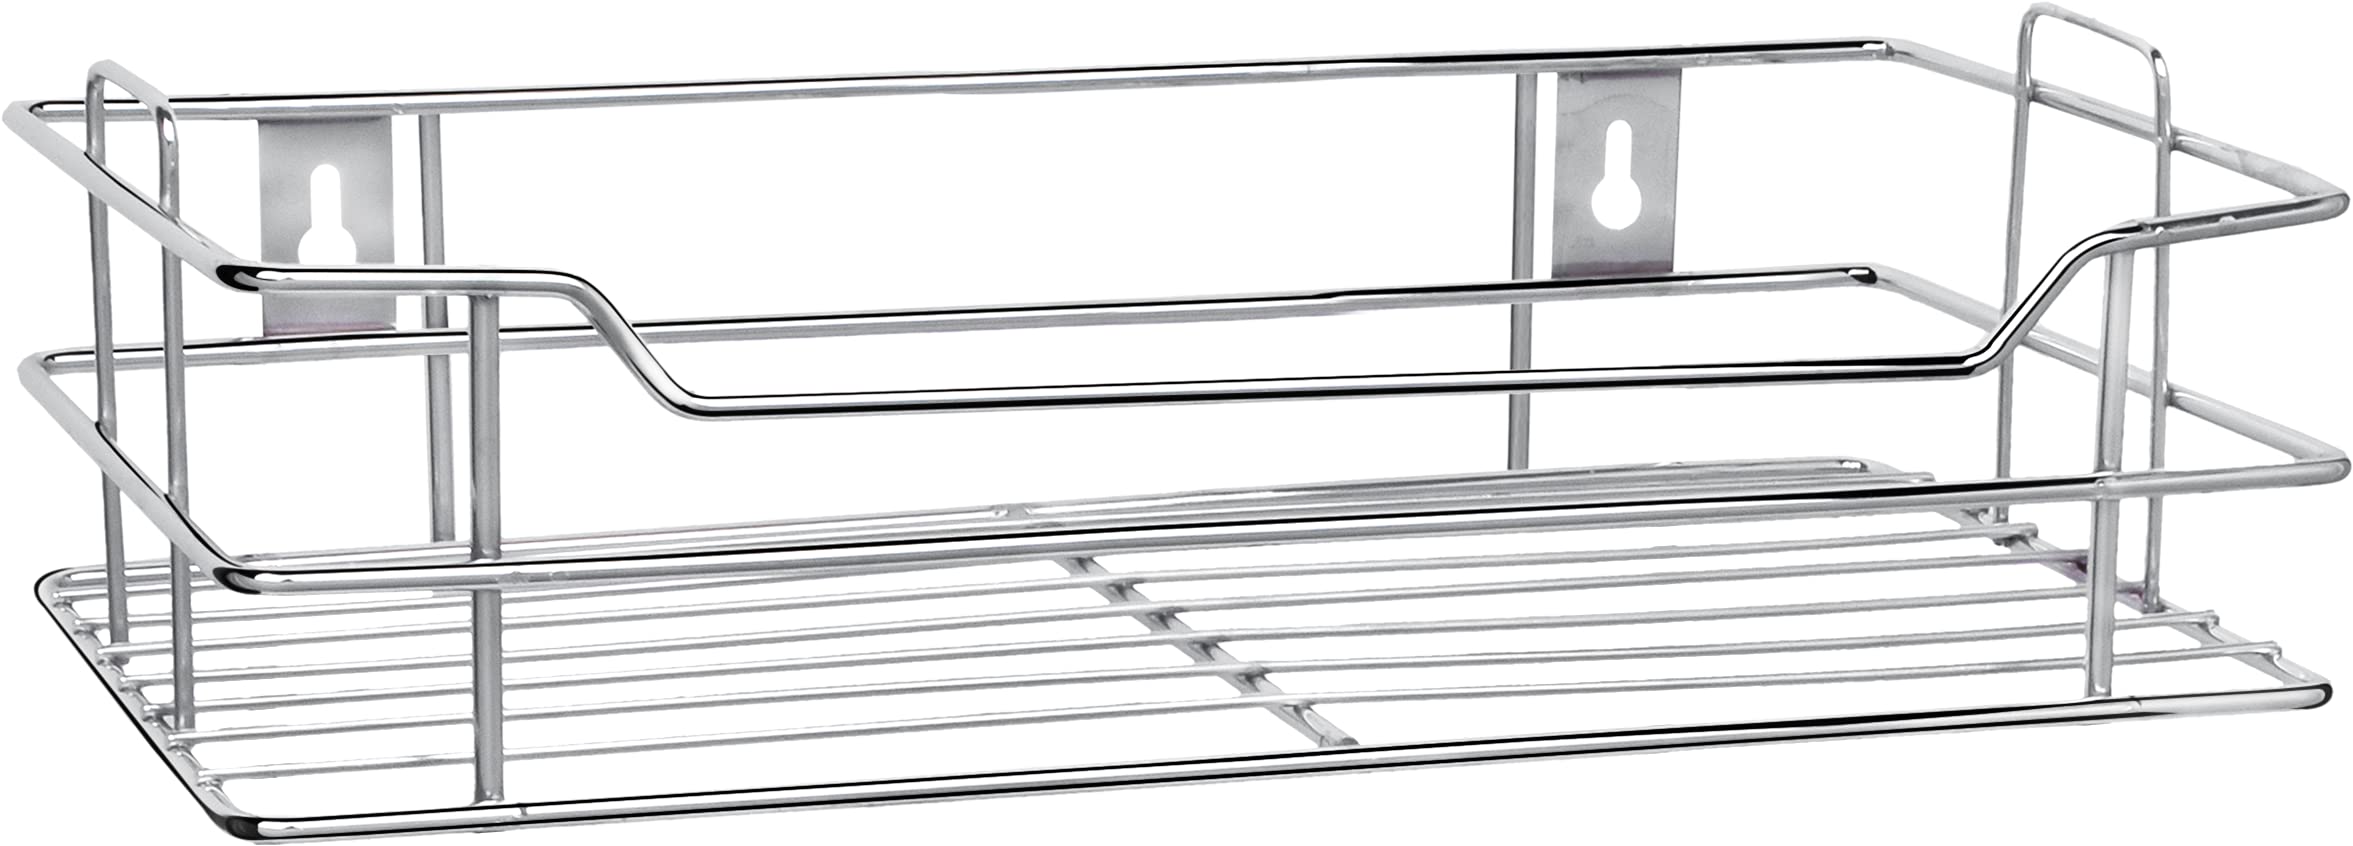 Plantex Multipurpose Large Stainless Steel Shelf/Rack/Organizer for Bathroom and Kitchen Accessories (Chrome-Silver)